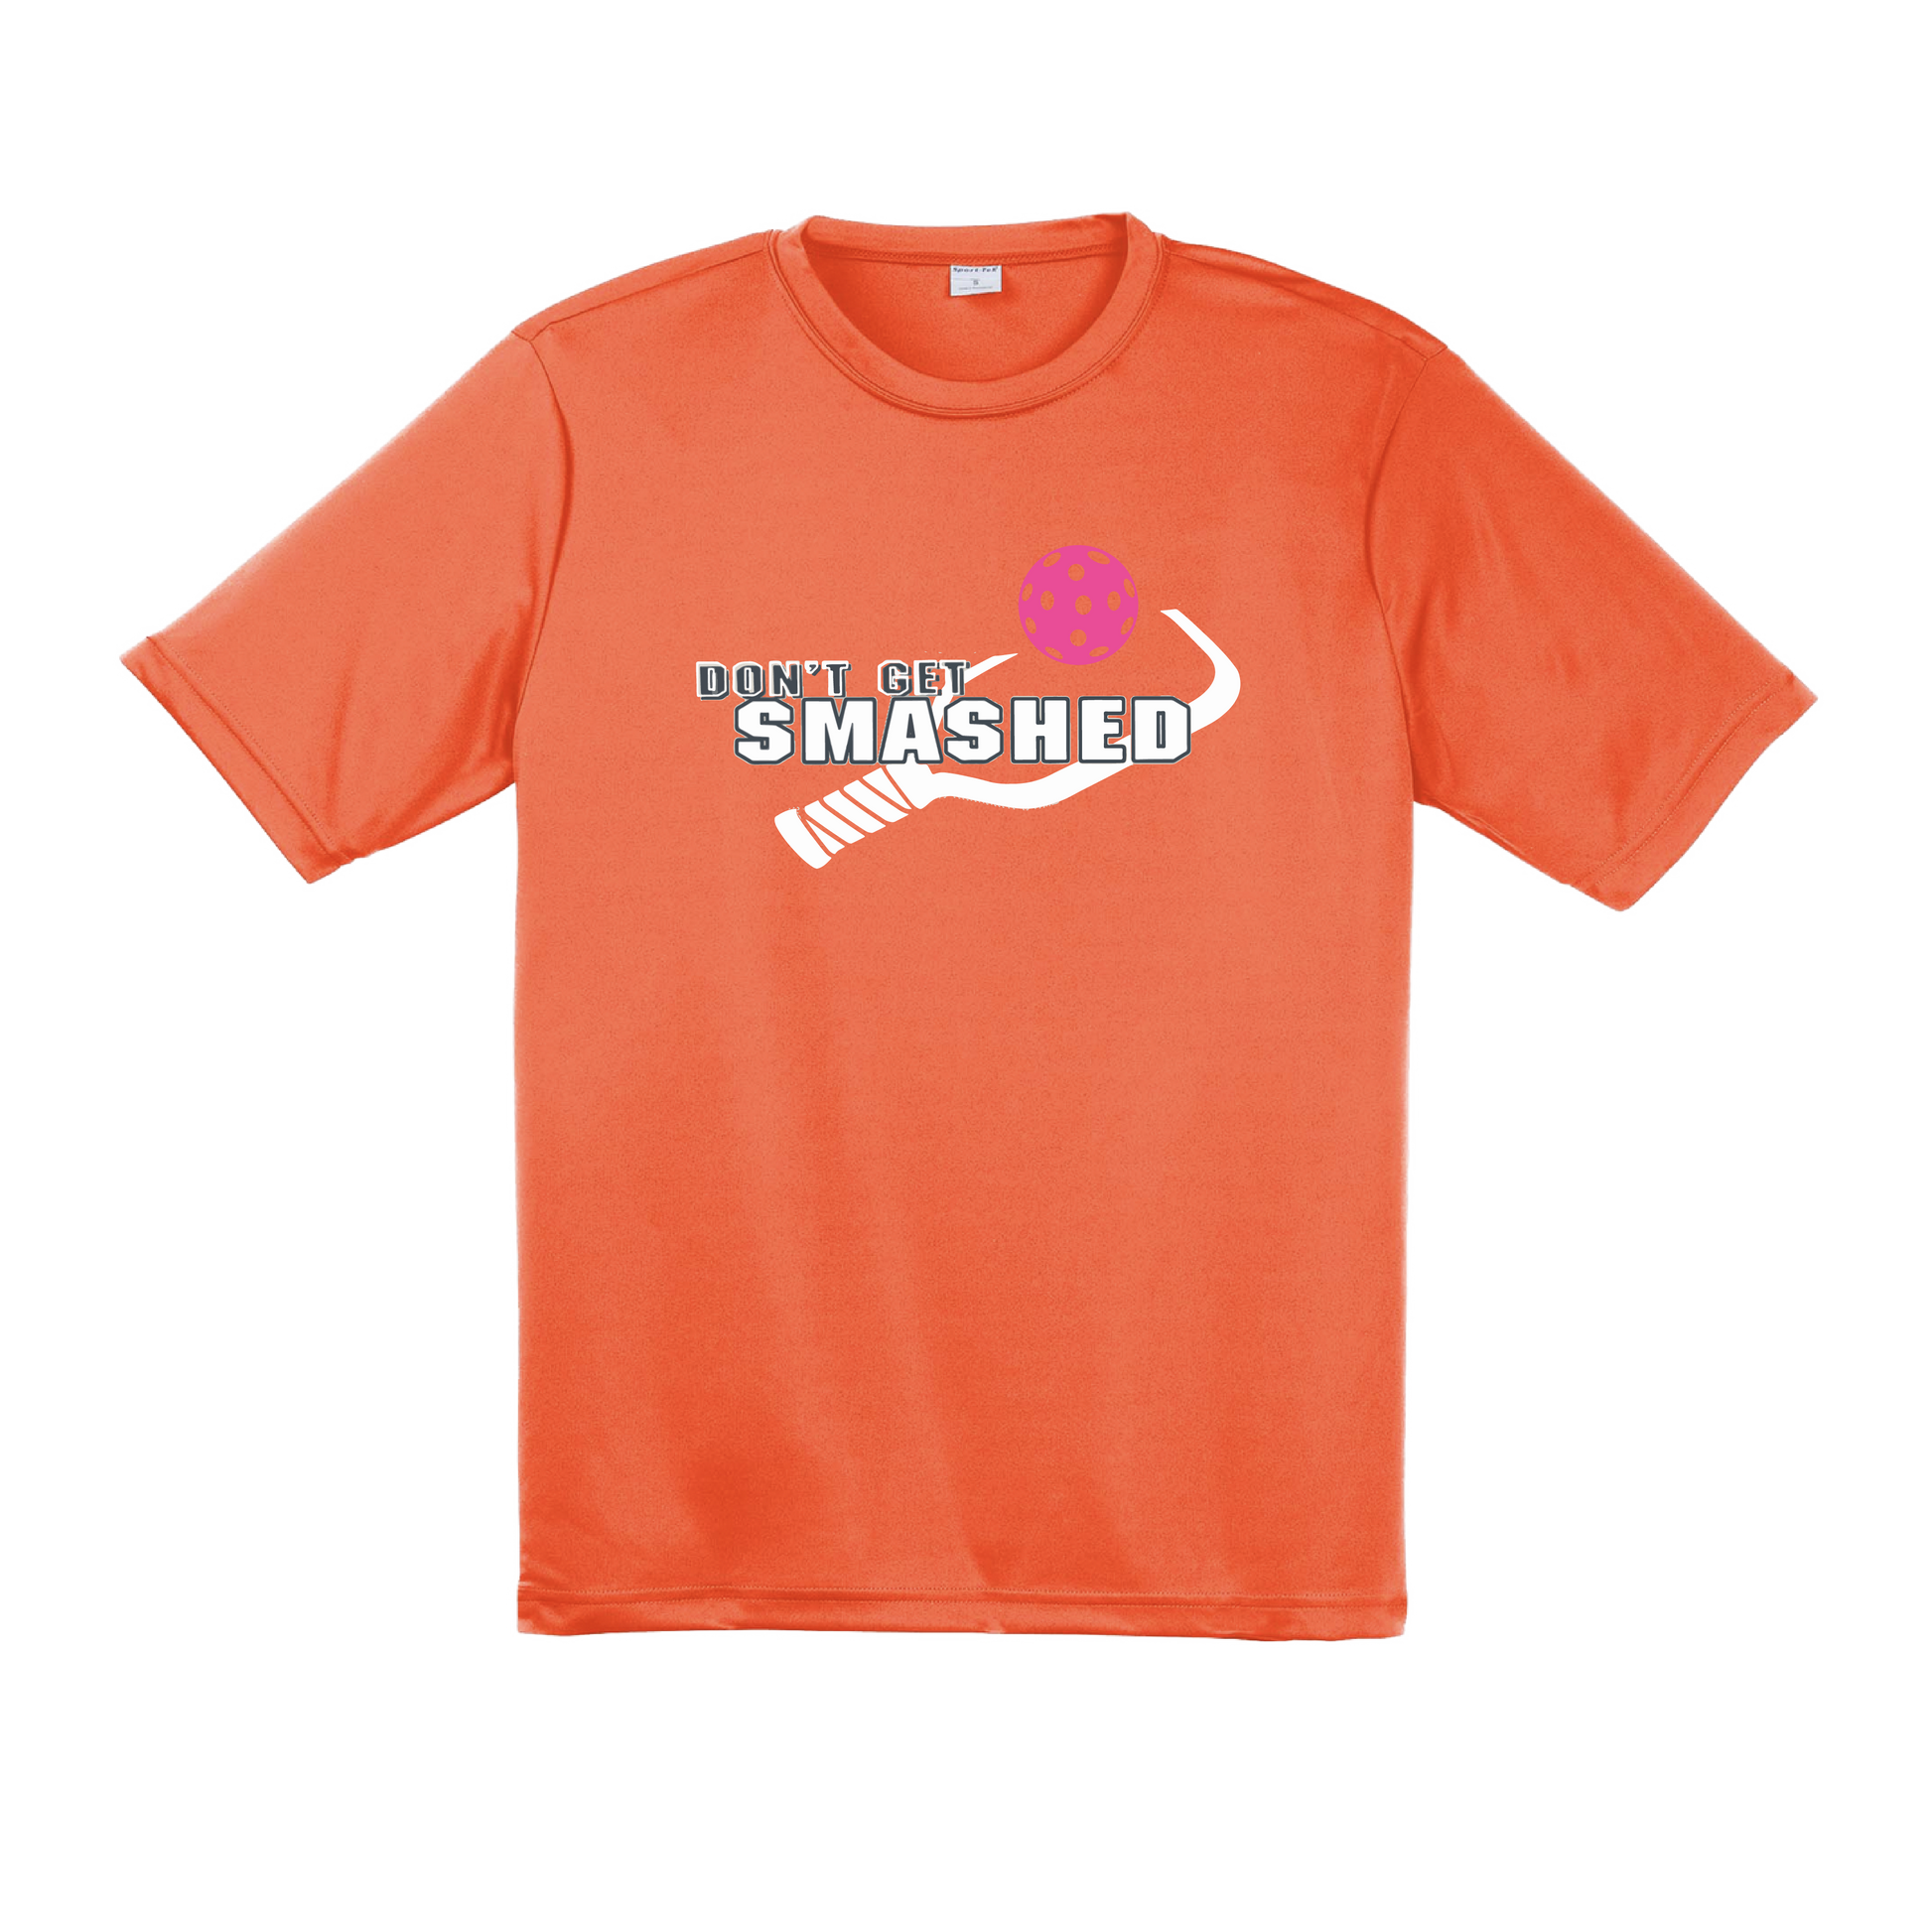 Our super-light and airy shirts keep you cool and dry for whatever sportin' pleasure you choose. We've added PosiCharge to make sure our colors stay vibrant and logos can't get faded. So comfy, you'll forget you're wearing it. Plus, no tags needed.